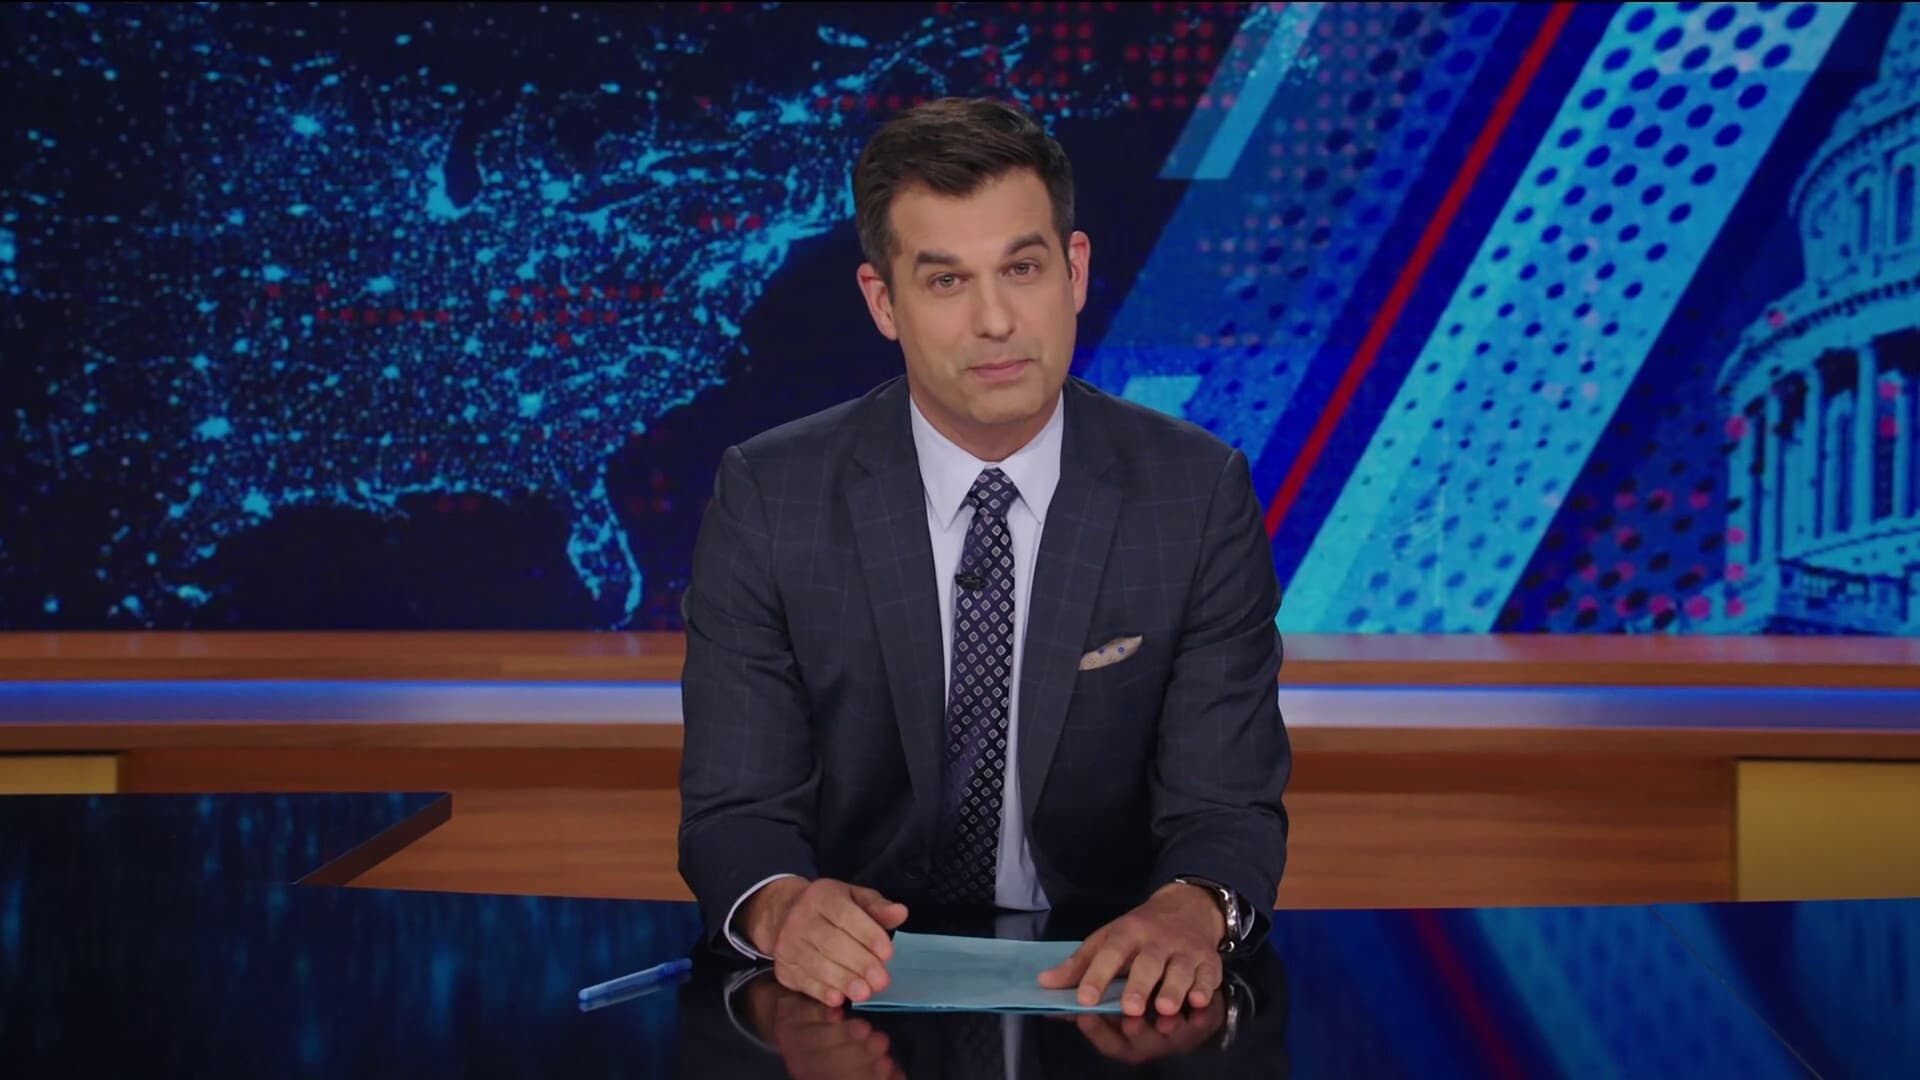 The Daily Show 29x52